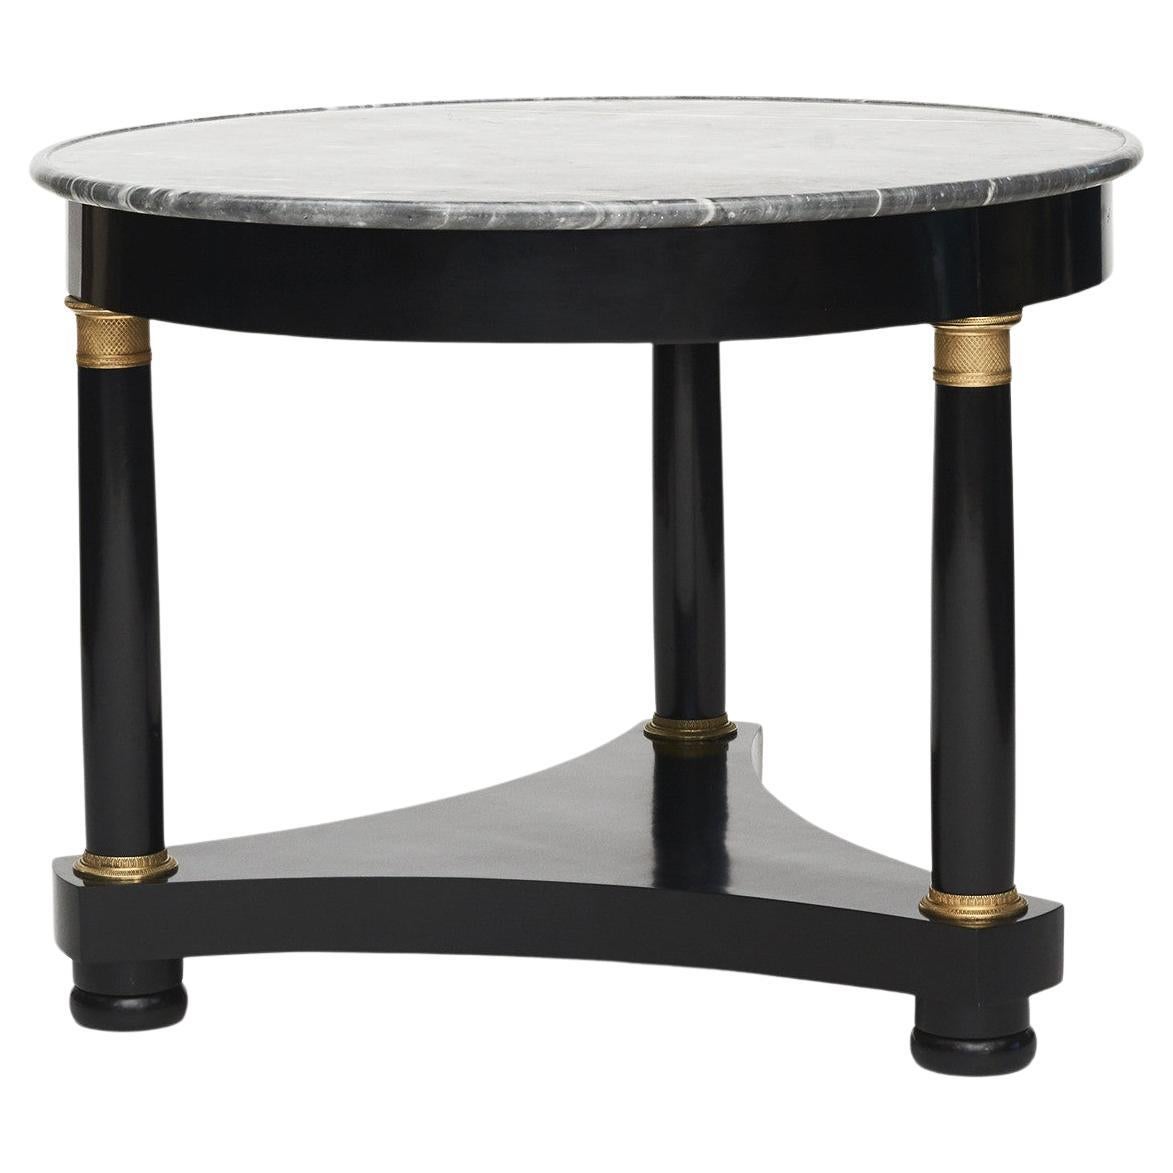 Charles X Center Table With Bardiglio Nuvolato Marble Top. France C. 1820. For Sale